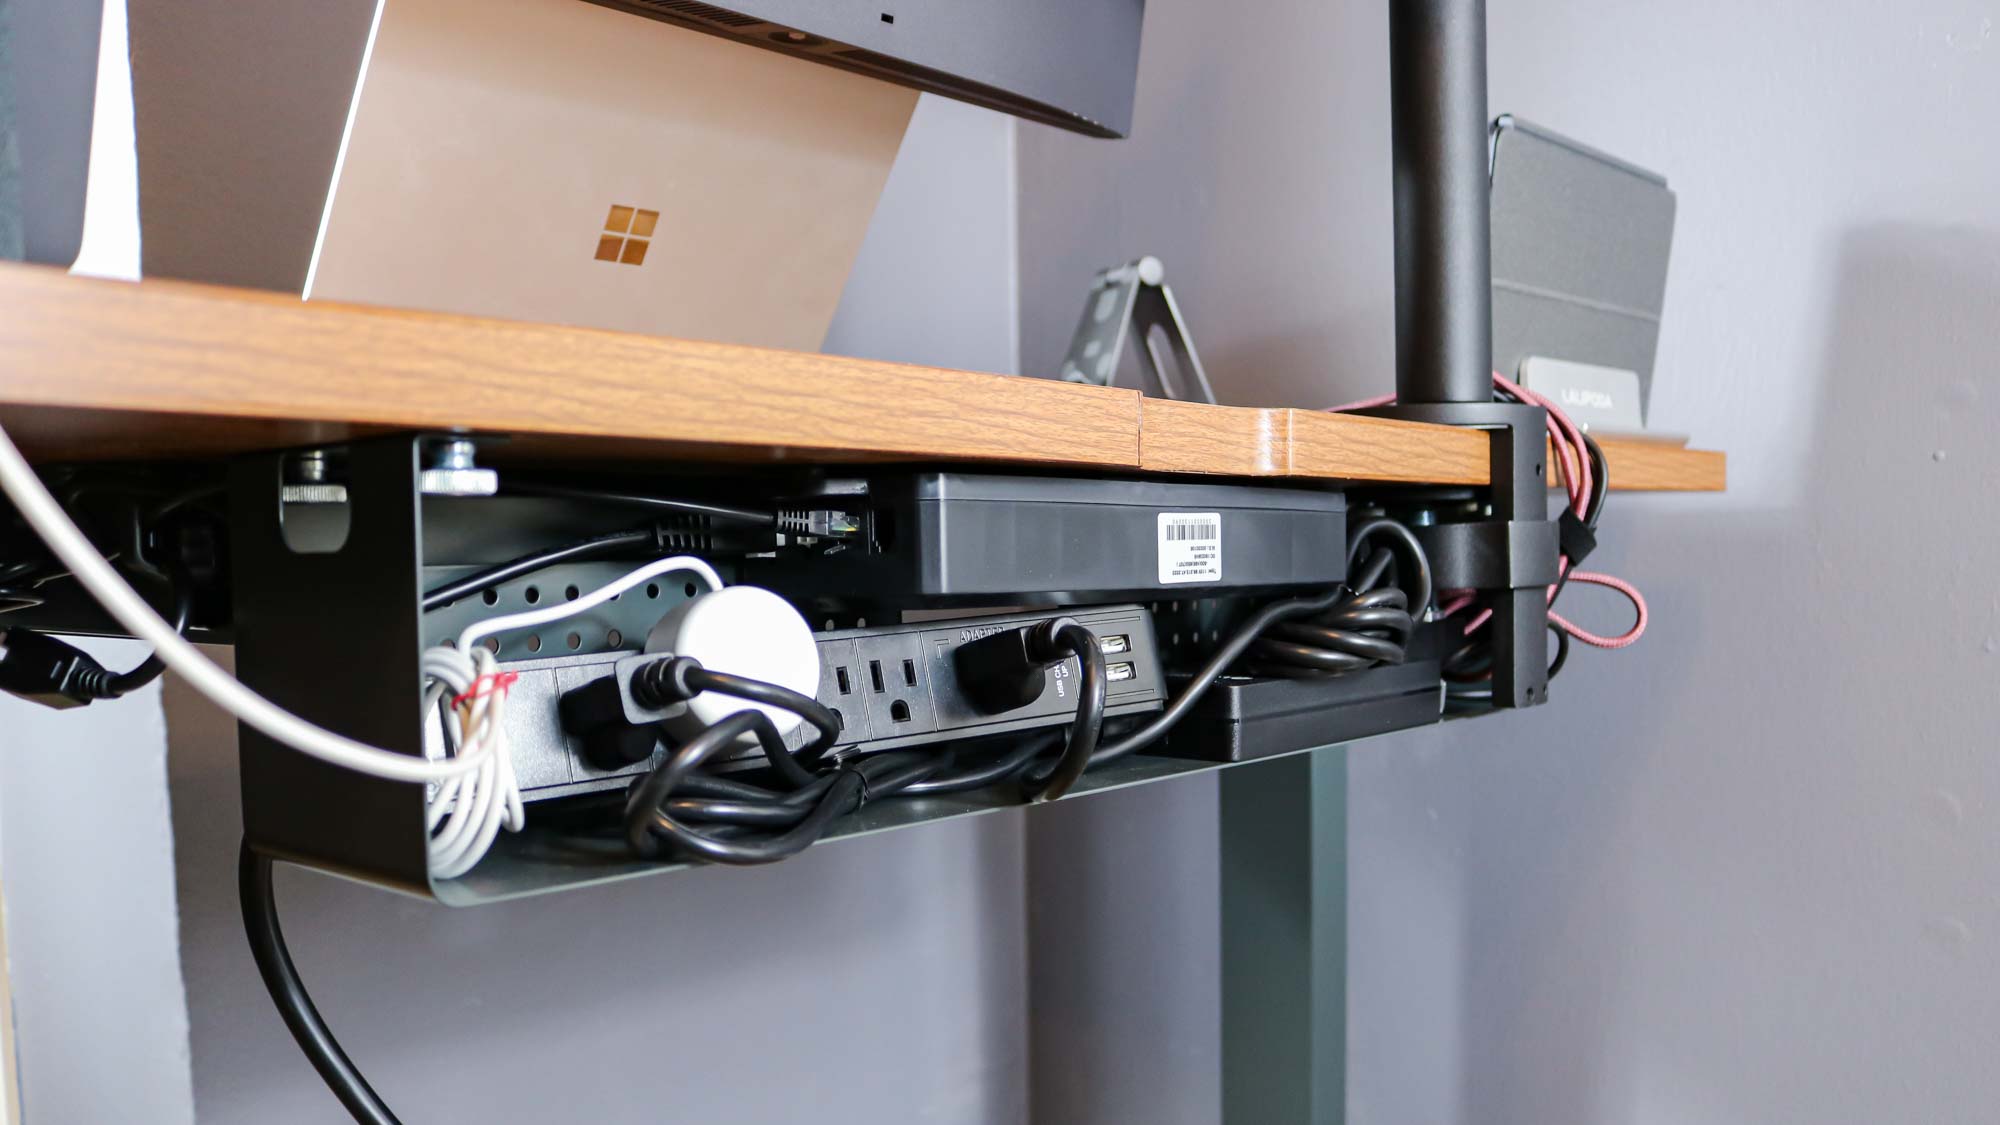 The Branch Duo Standing Desk's cable management tray filled with a surge protector and various cables